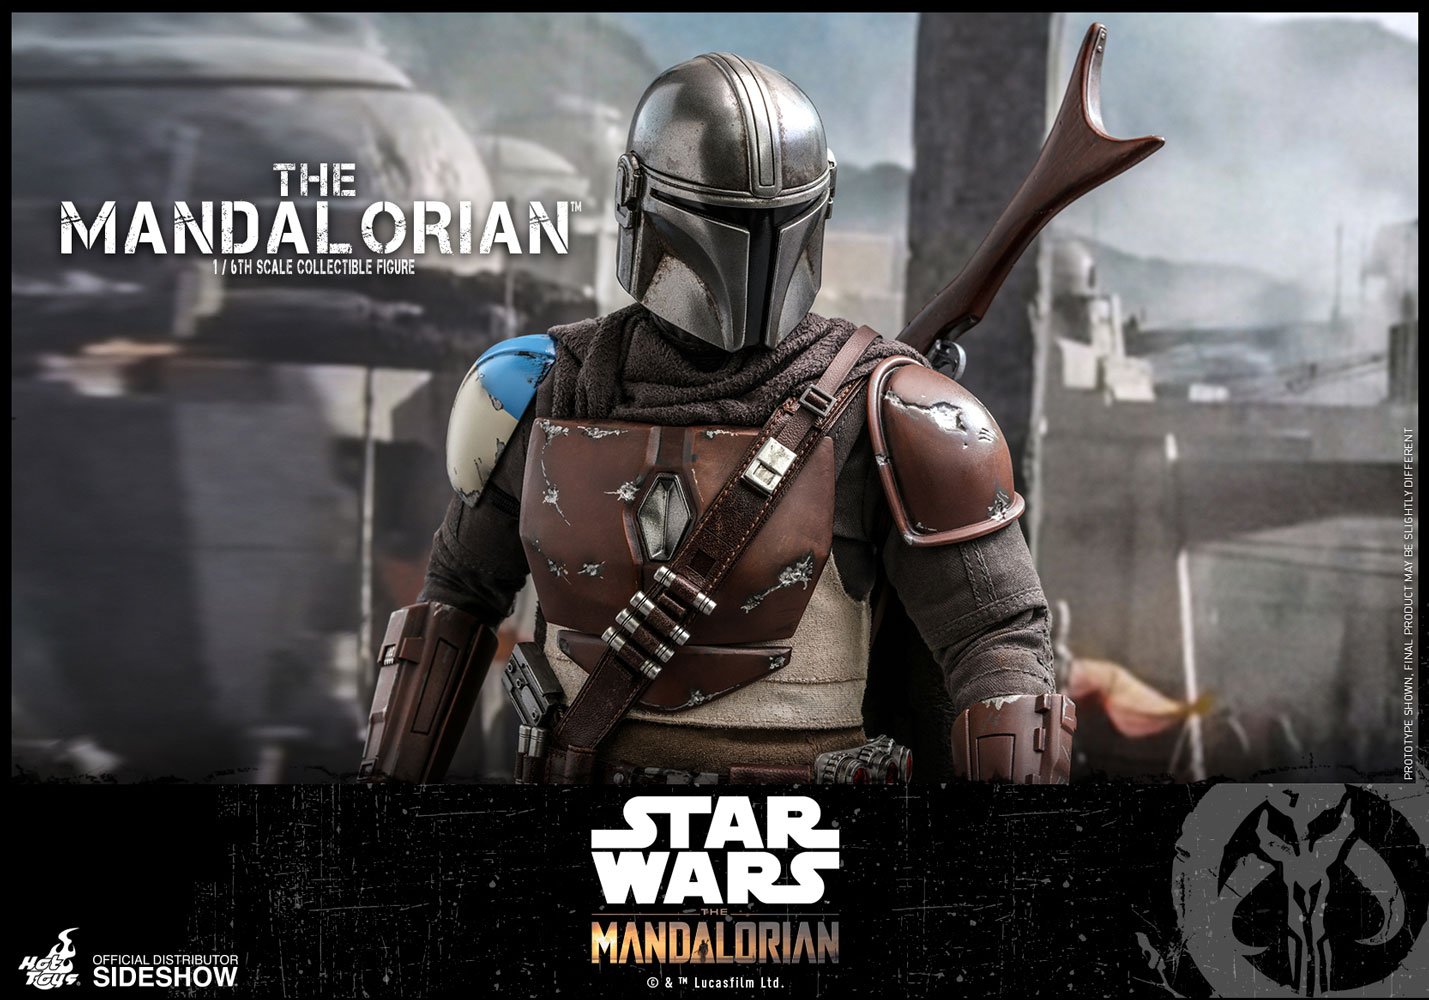 The Mandalorian 1/6 Scale Figure by Hot Toys | Sideshow Collectibles